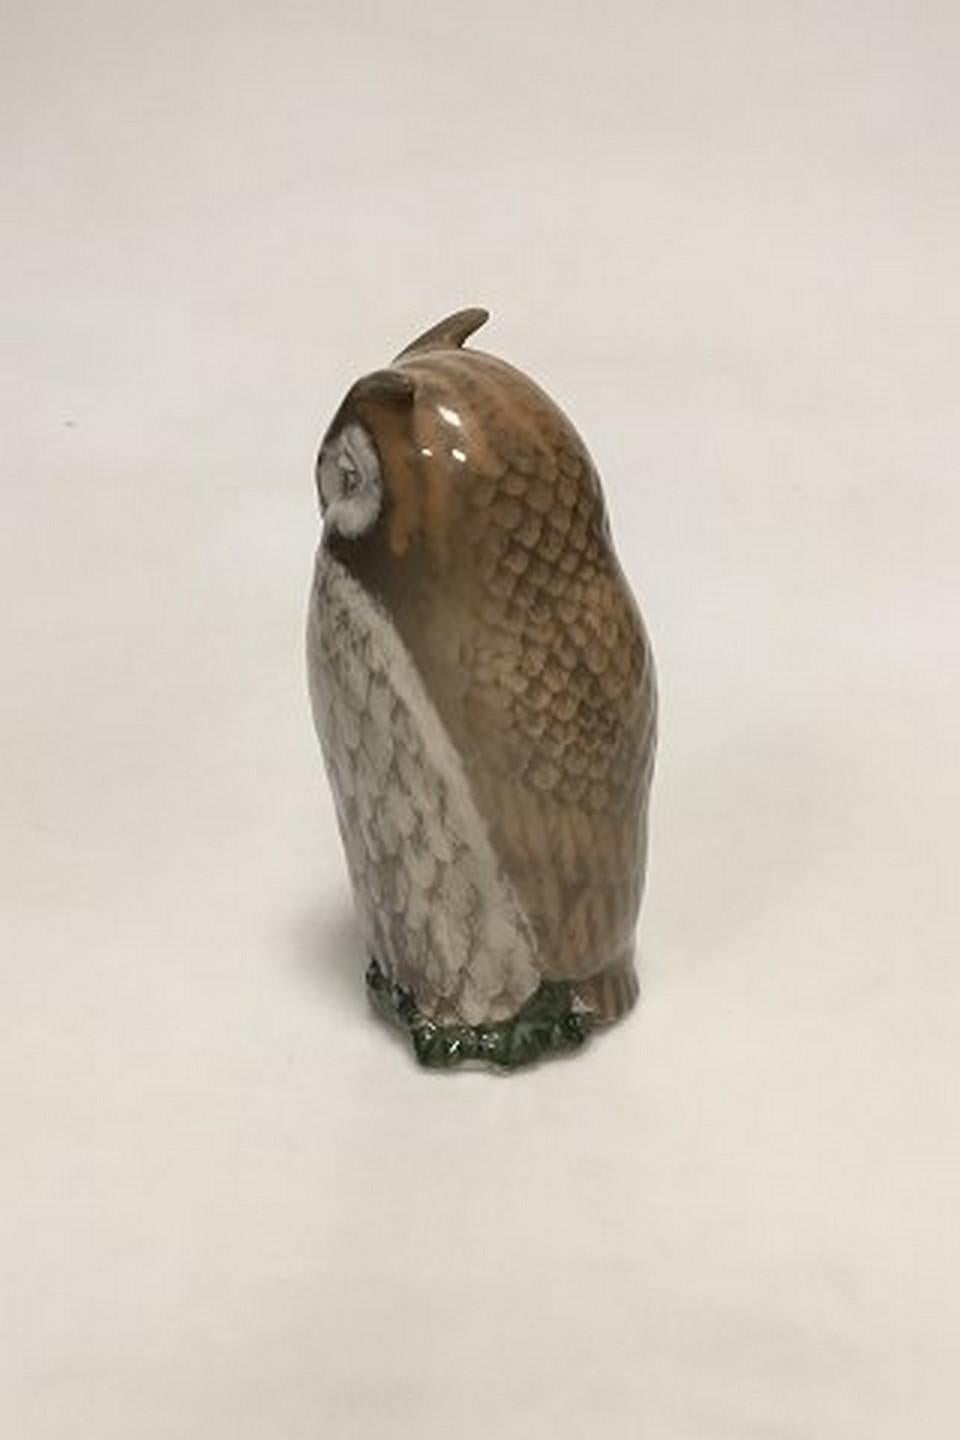 Royal Copenhagen figurine of owl No 2999. Measures: 14 cm / 5 33/64 in. and is in good condition. Designed by Theodor Madsen.
Item no.: 433630.